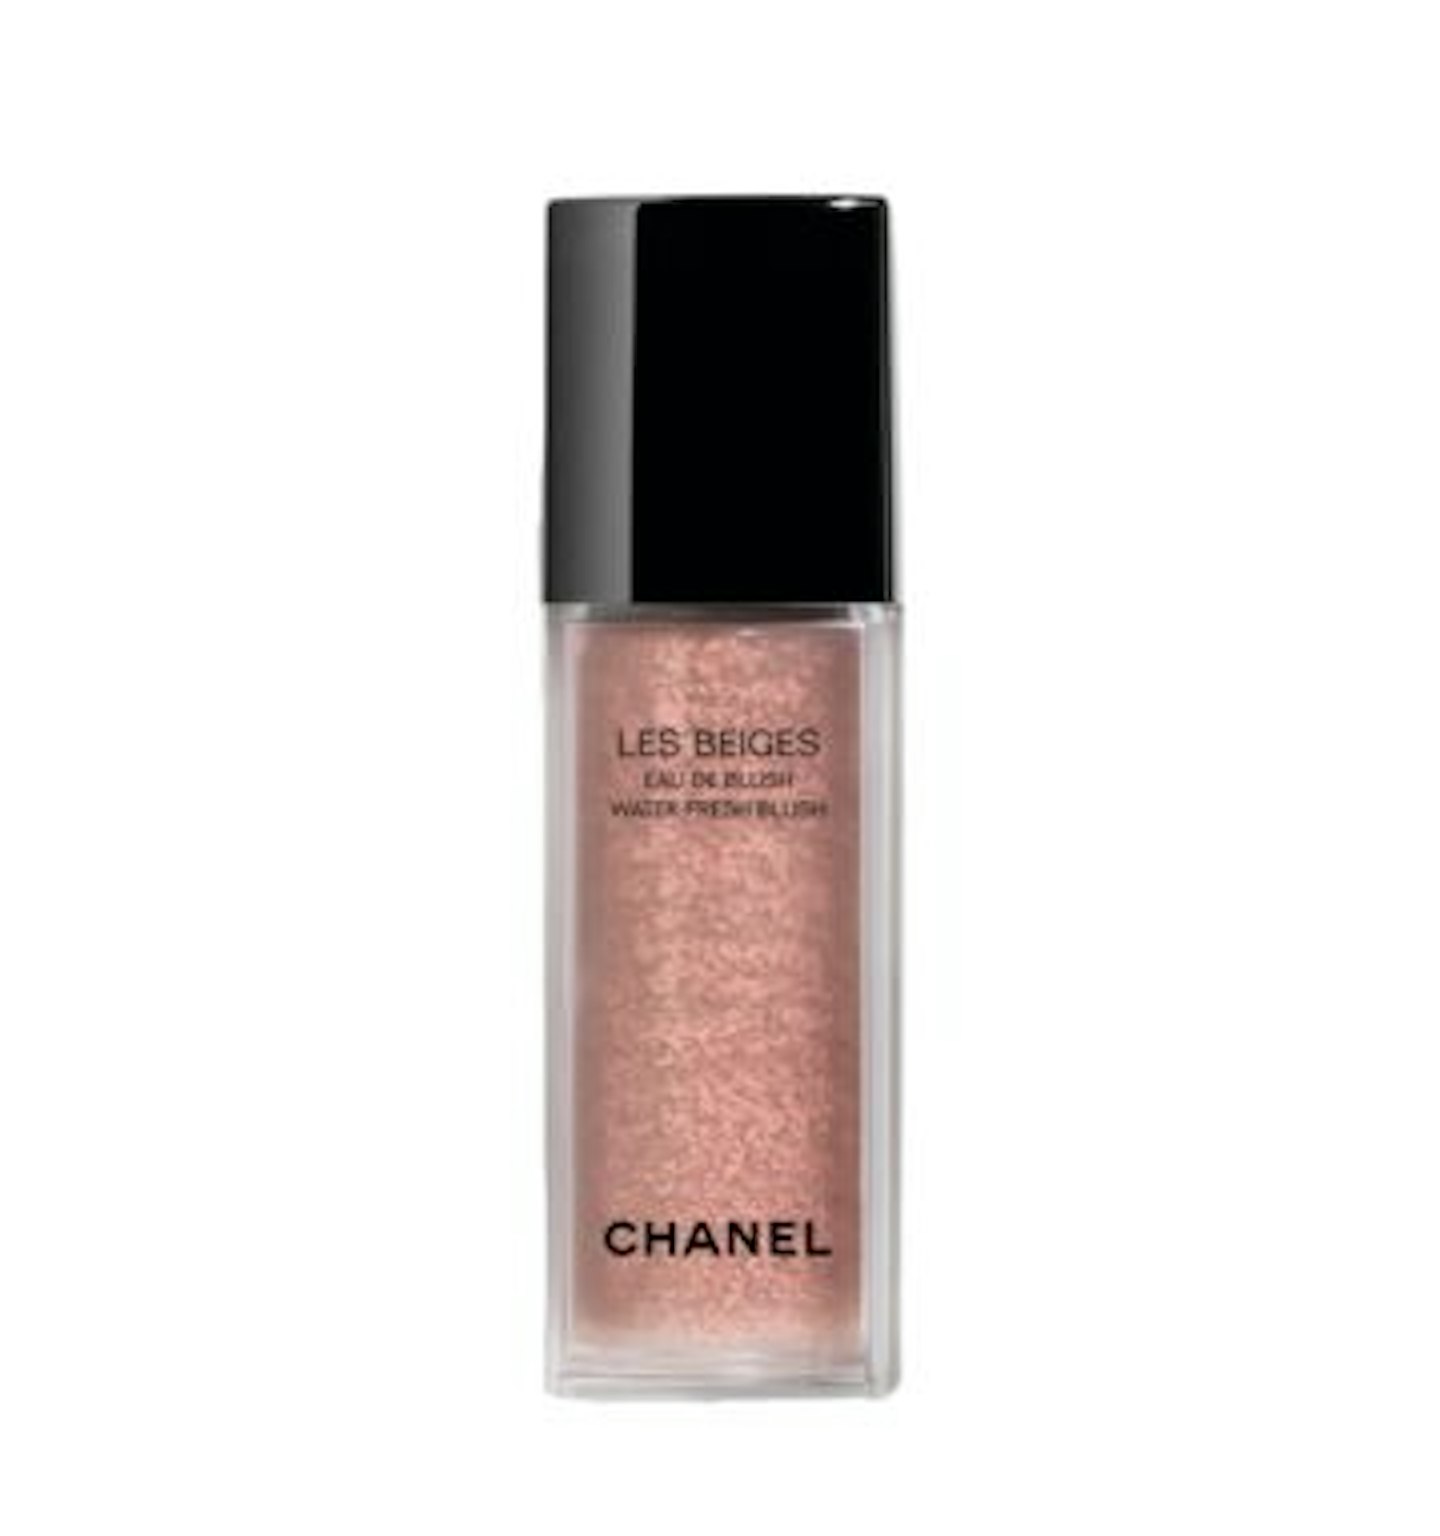 Chanel Les Beiges Water-Fresh Blush in Light Pink